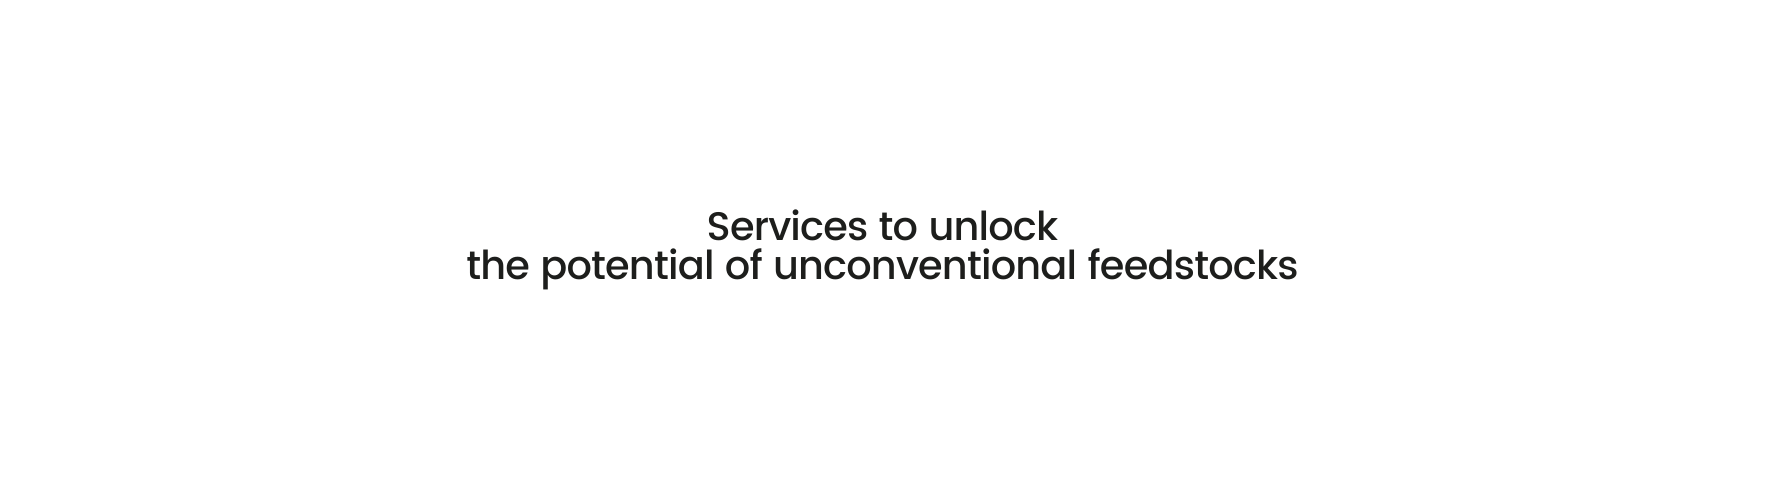 Services to unlock the potential of unconventional feedstocks